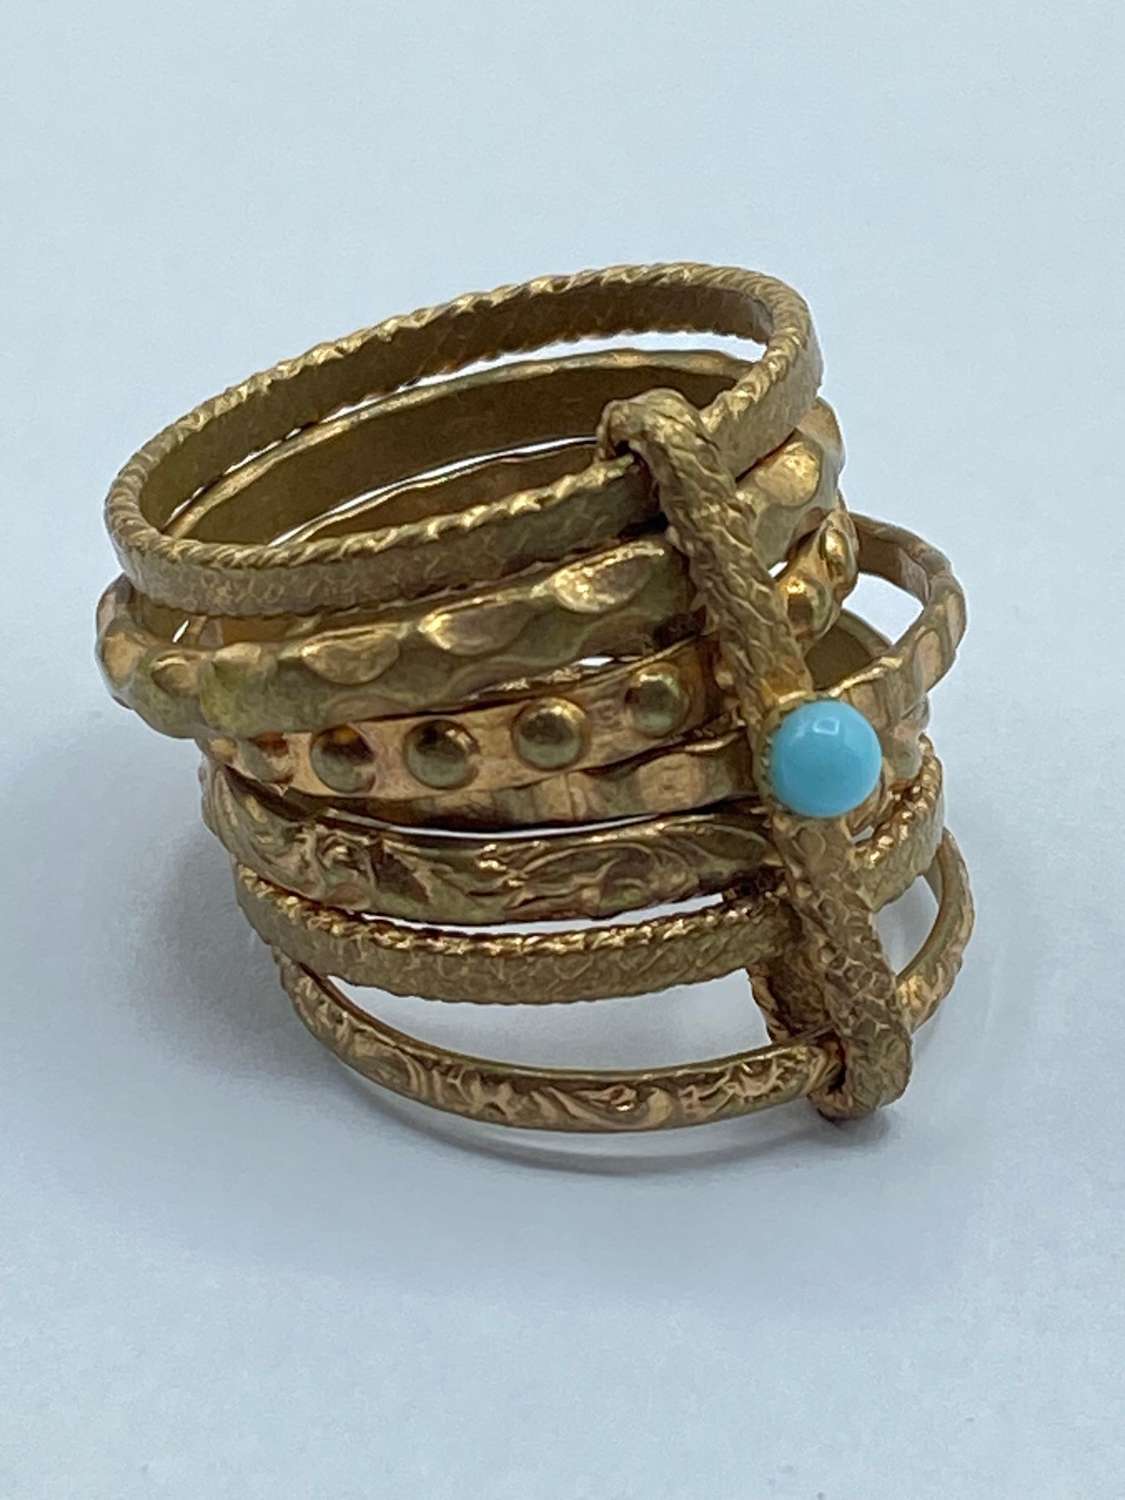 Antique Egyptian Revival Gold Plated & Turquoise Gem Multiband Ring